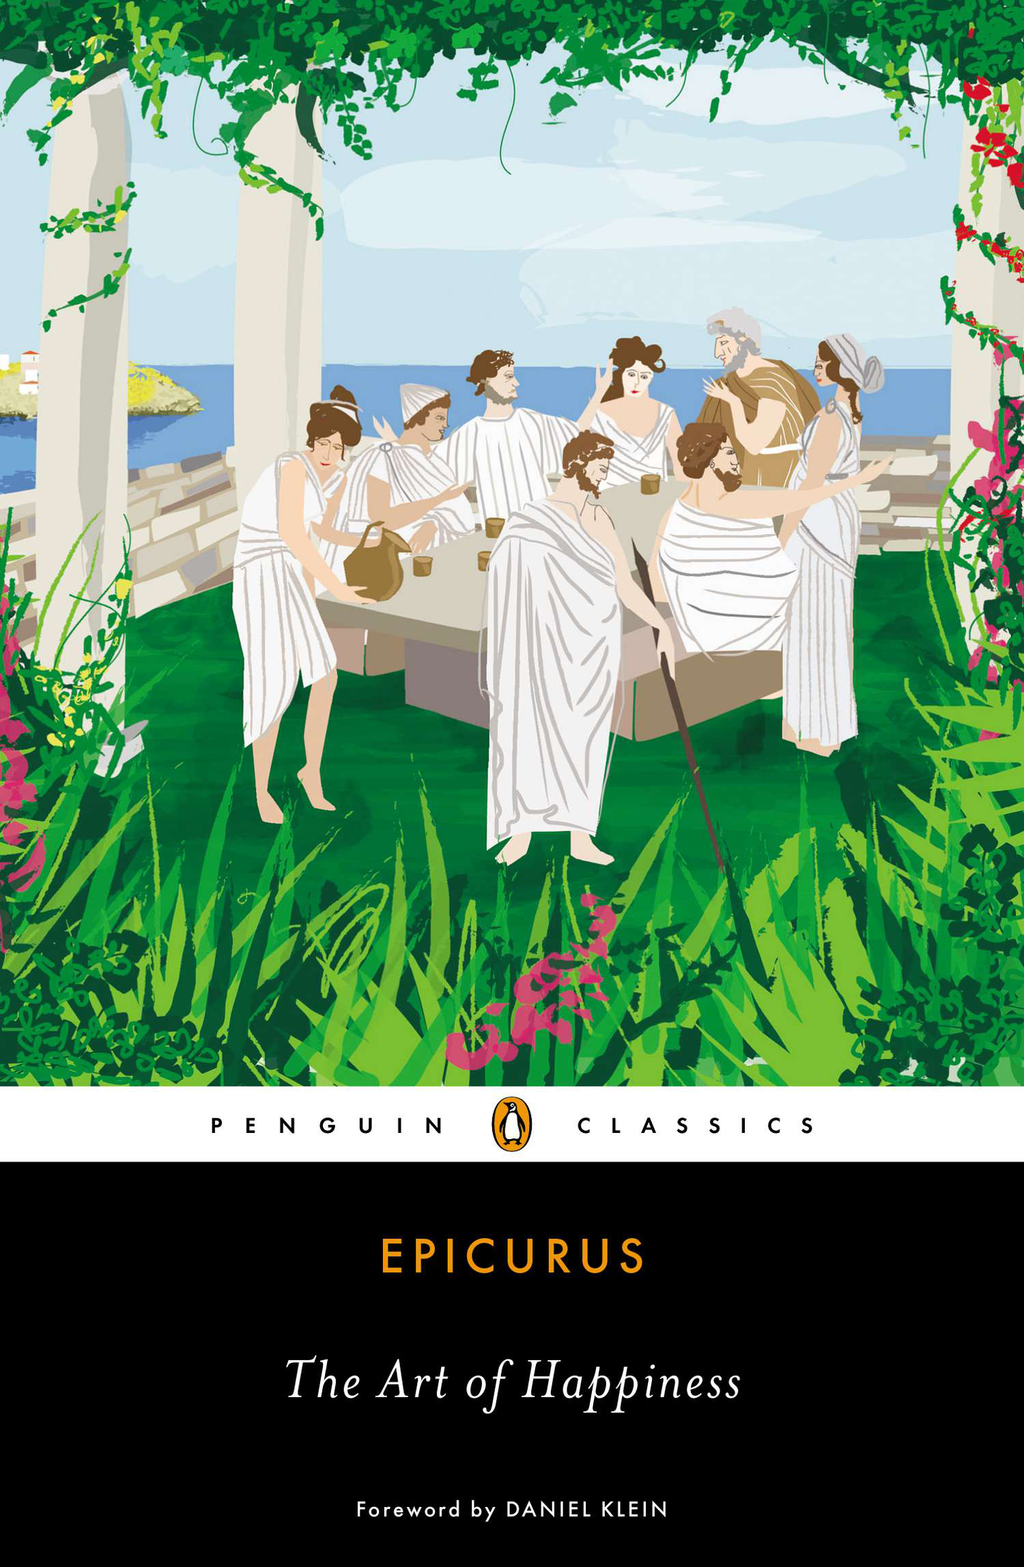 Epicurus: The Art Of Happiness. Give Back To The Rainforest Trust!